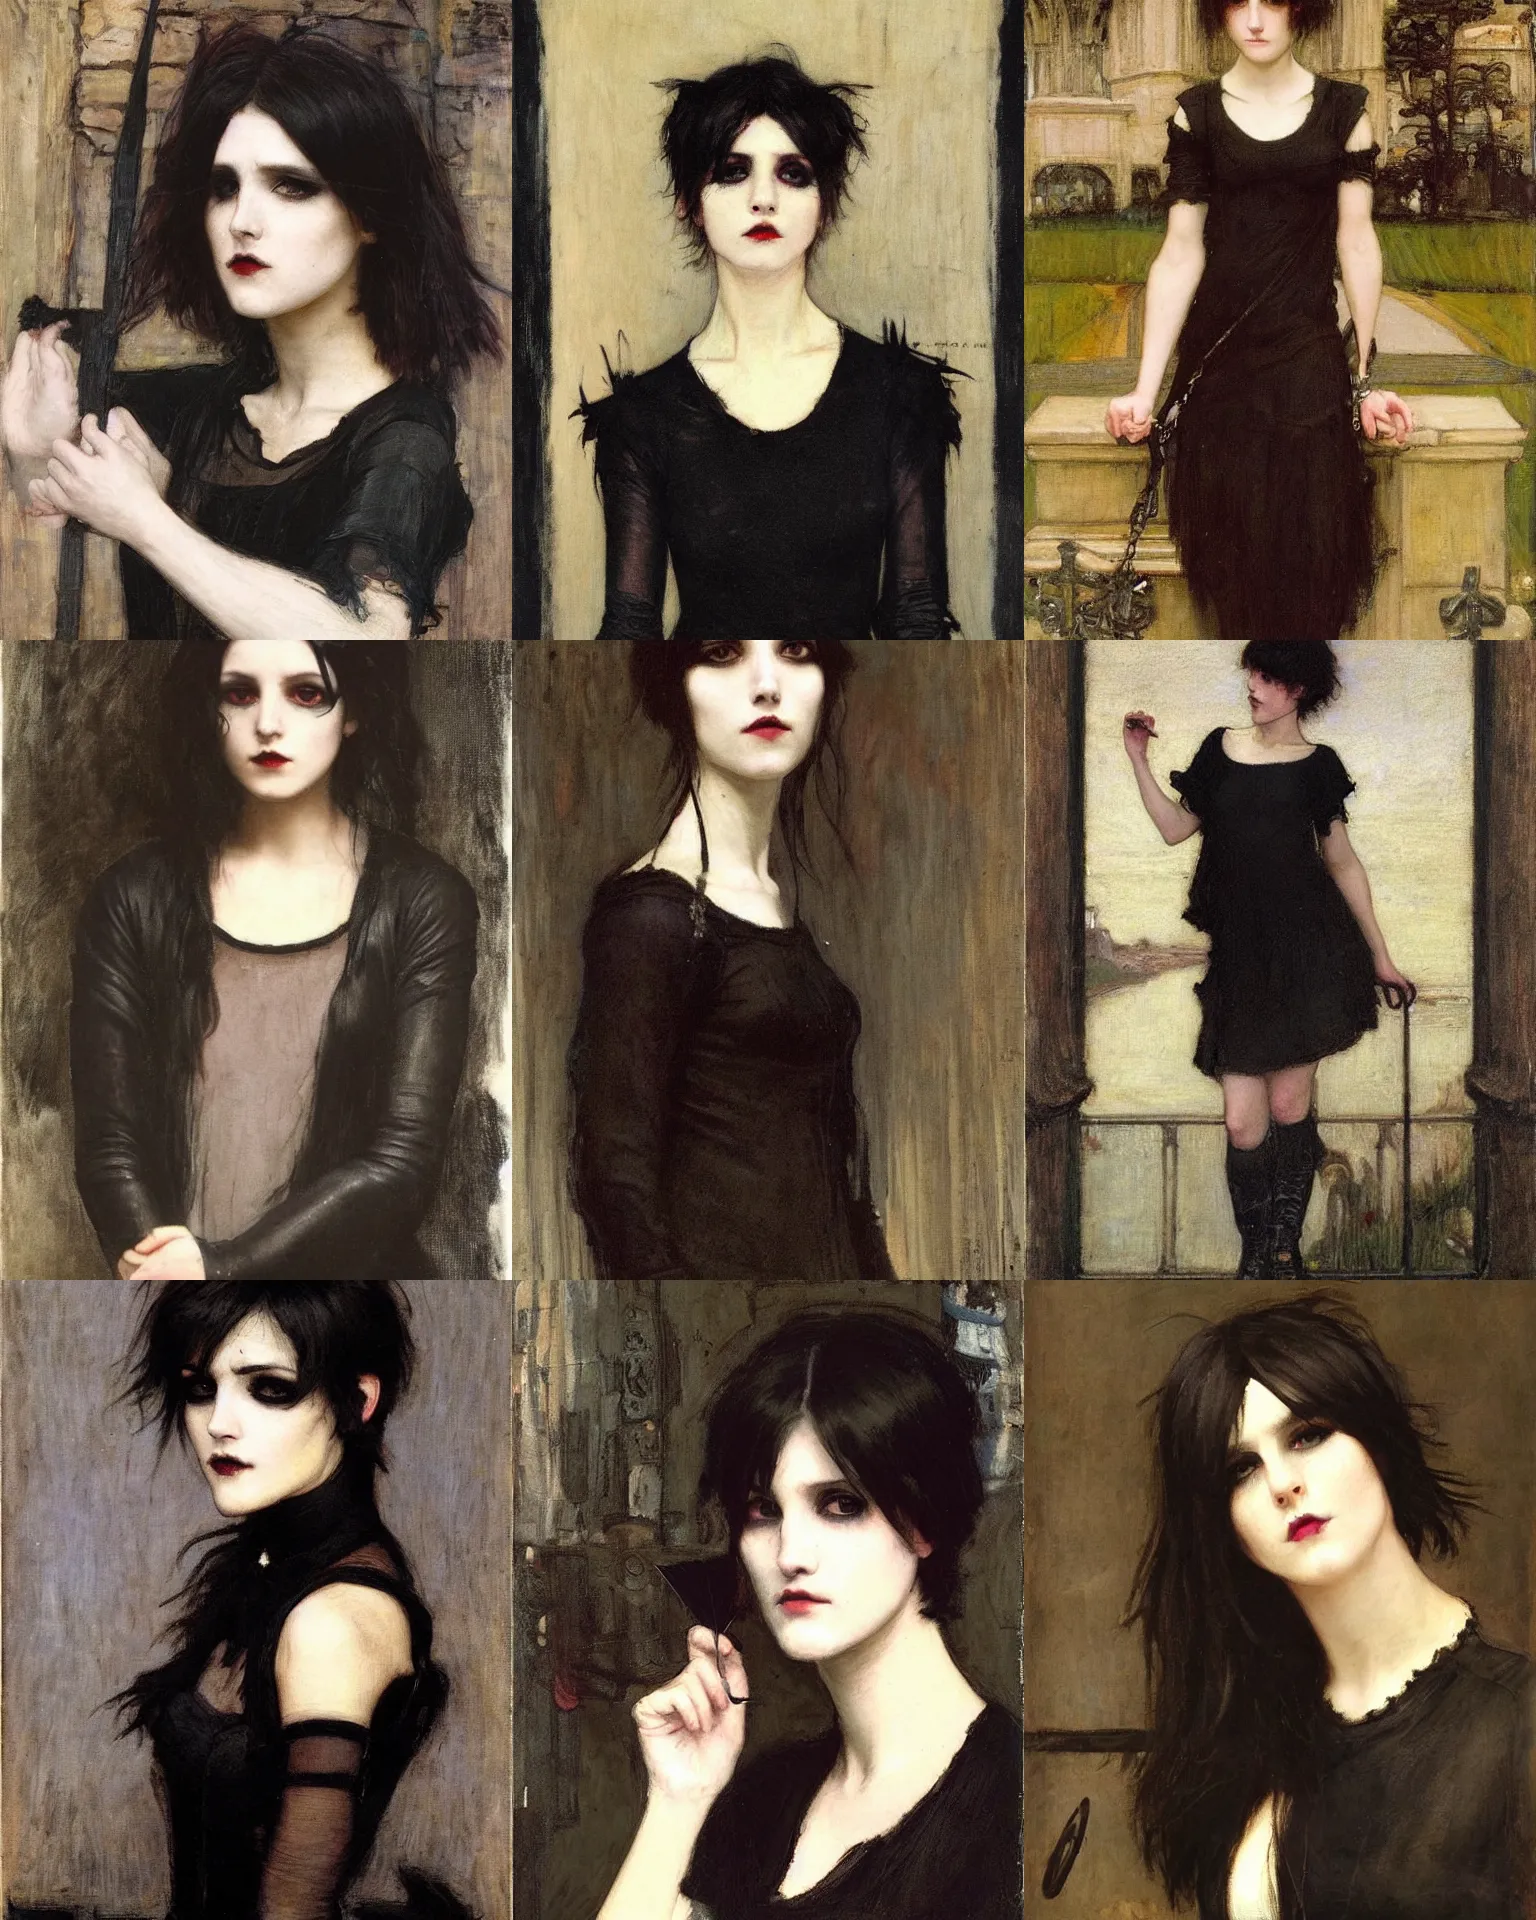 Prompt: A goth portrait by John William Waterhouse. Her hair is dark brown and cut into a short, messy pixie cut. She has a slightly rounded face, with a pointed chin, large entirely-black eyes, and a small nose. She is wearing a black tank top, a black leather jacket, a black knee-length skirt, a black choker, and black leather boots.